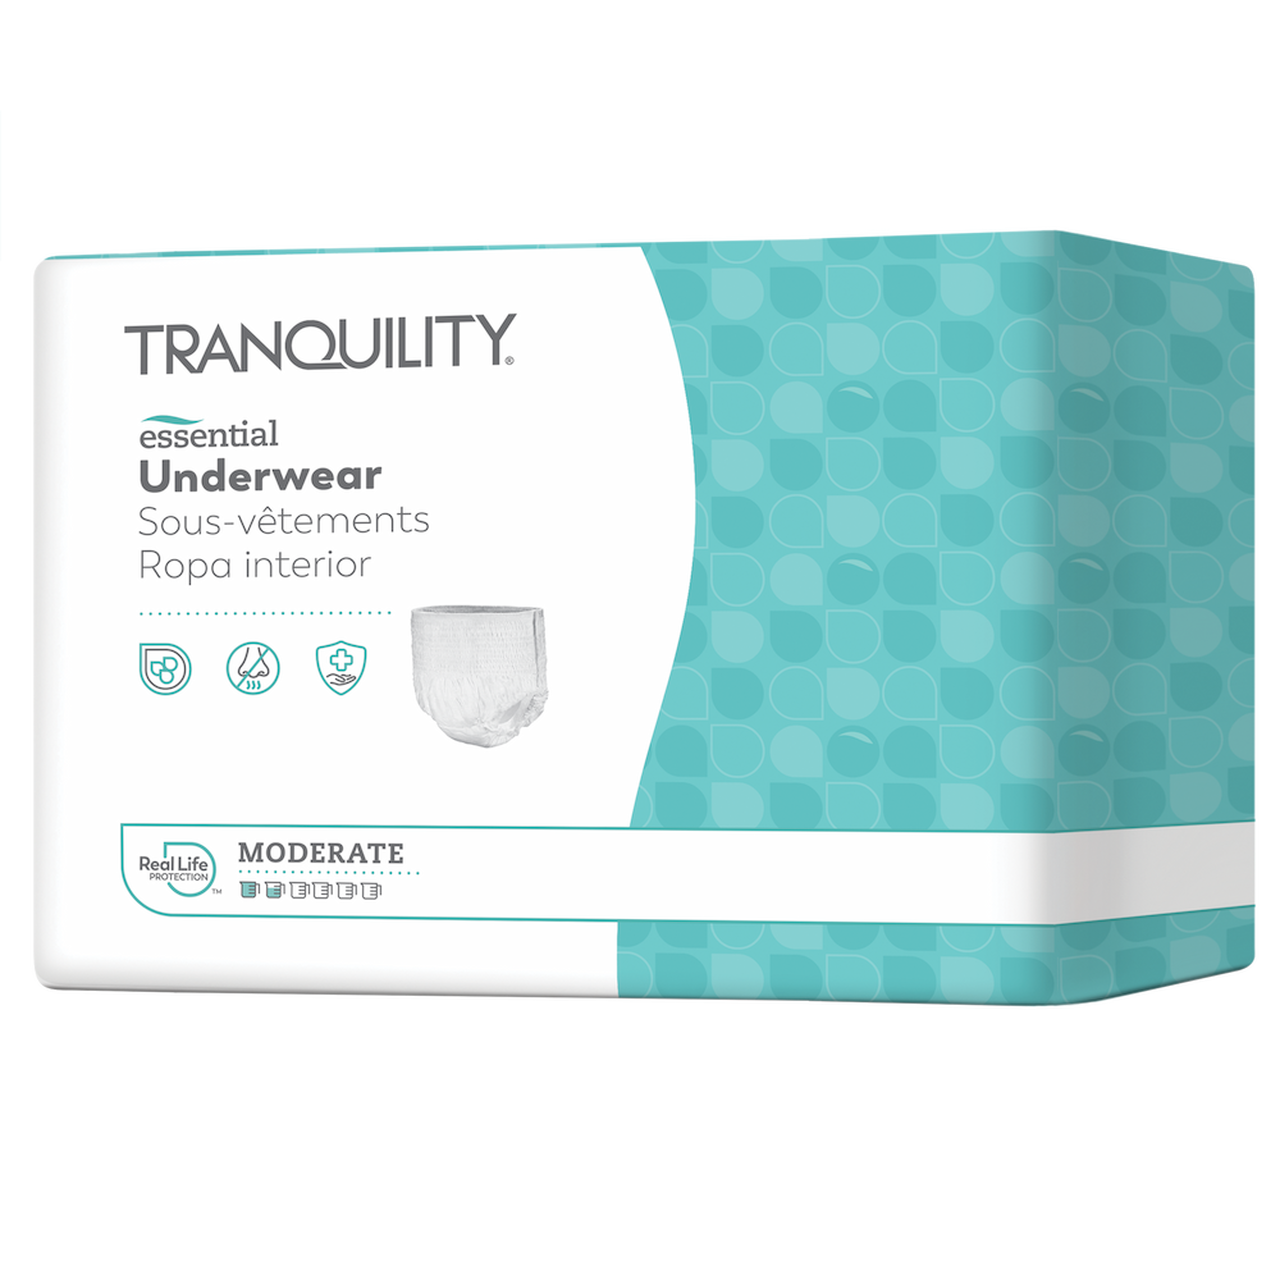 Prevail Daily Protective Underwear - Unisex Adult Incontinence Underwear -  Disposable Adult Diaper for Men & Women - Maximum Absorbency - Medium - 80